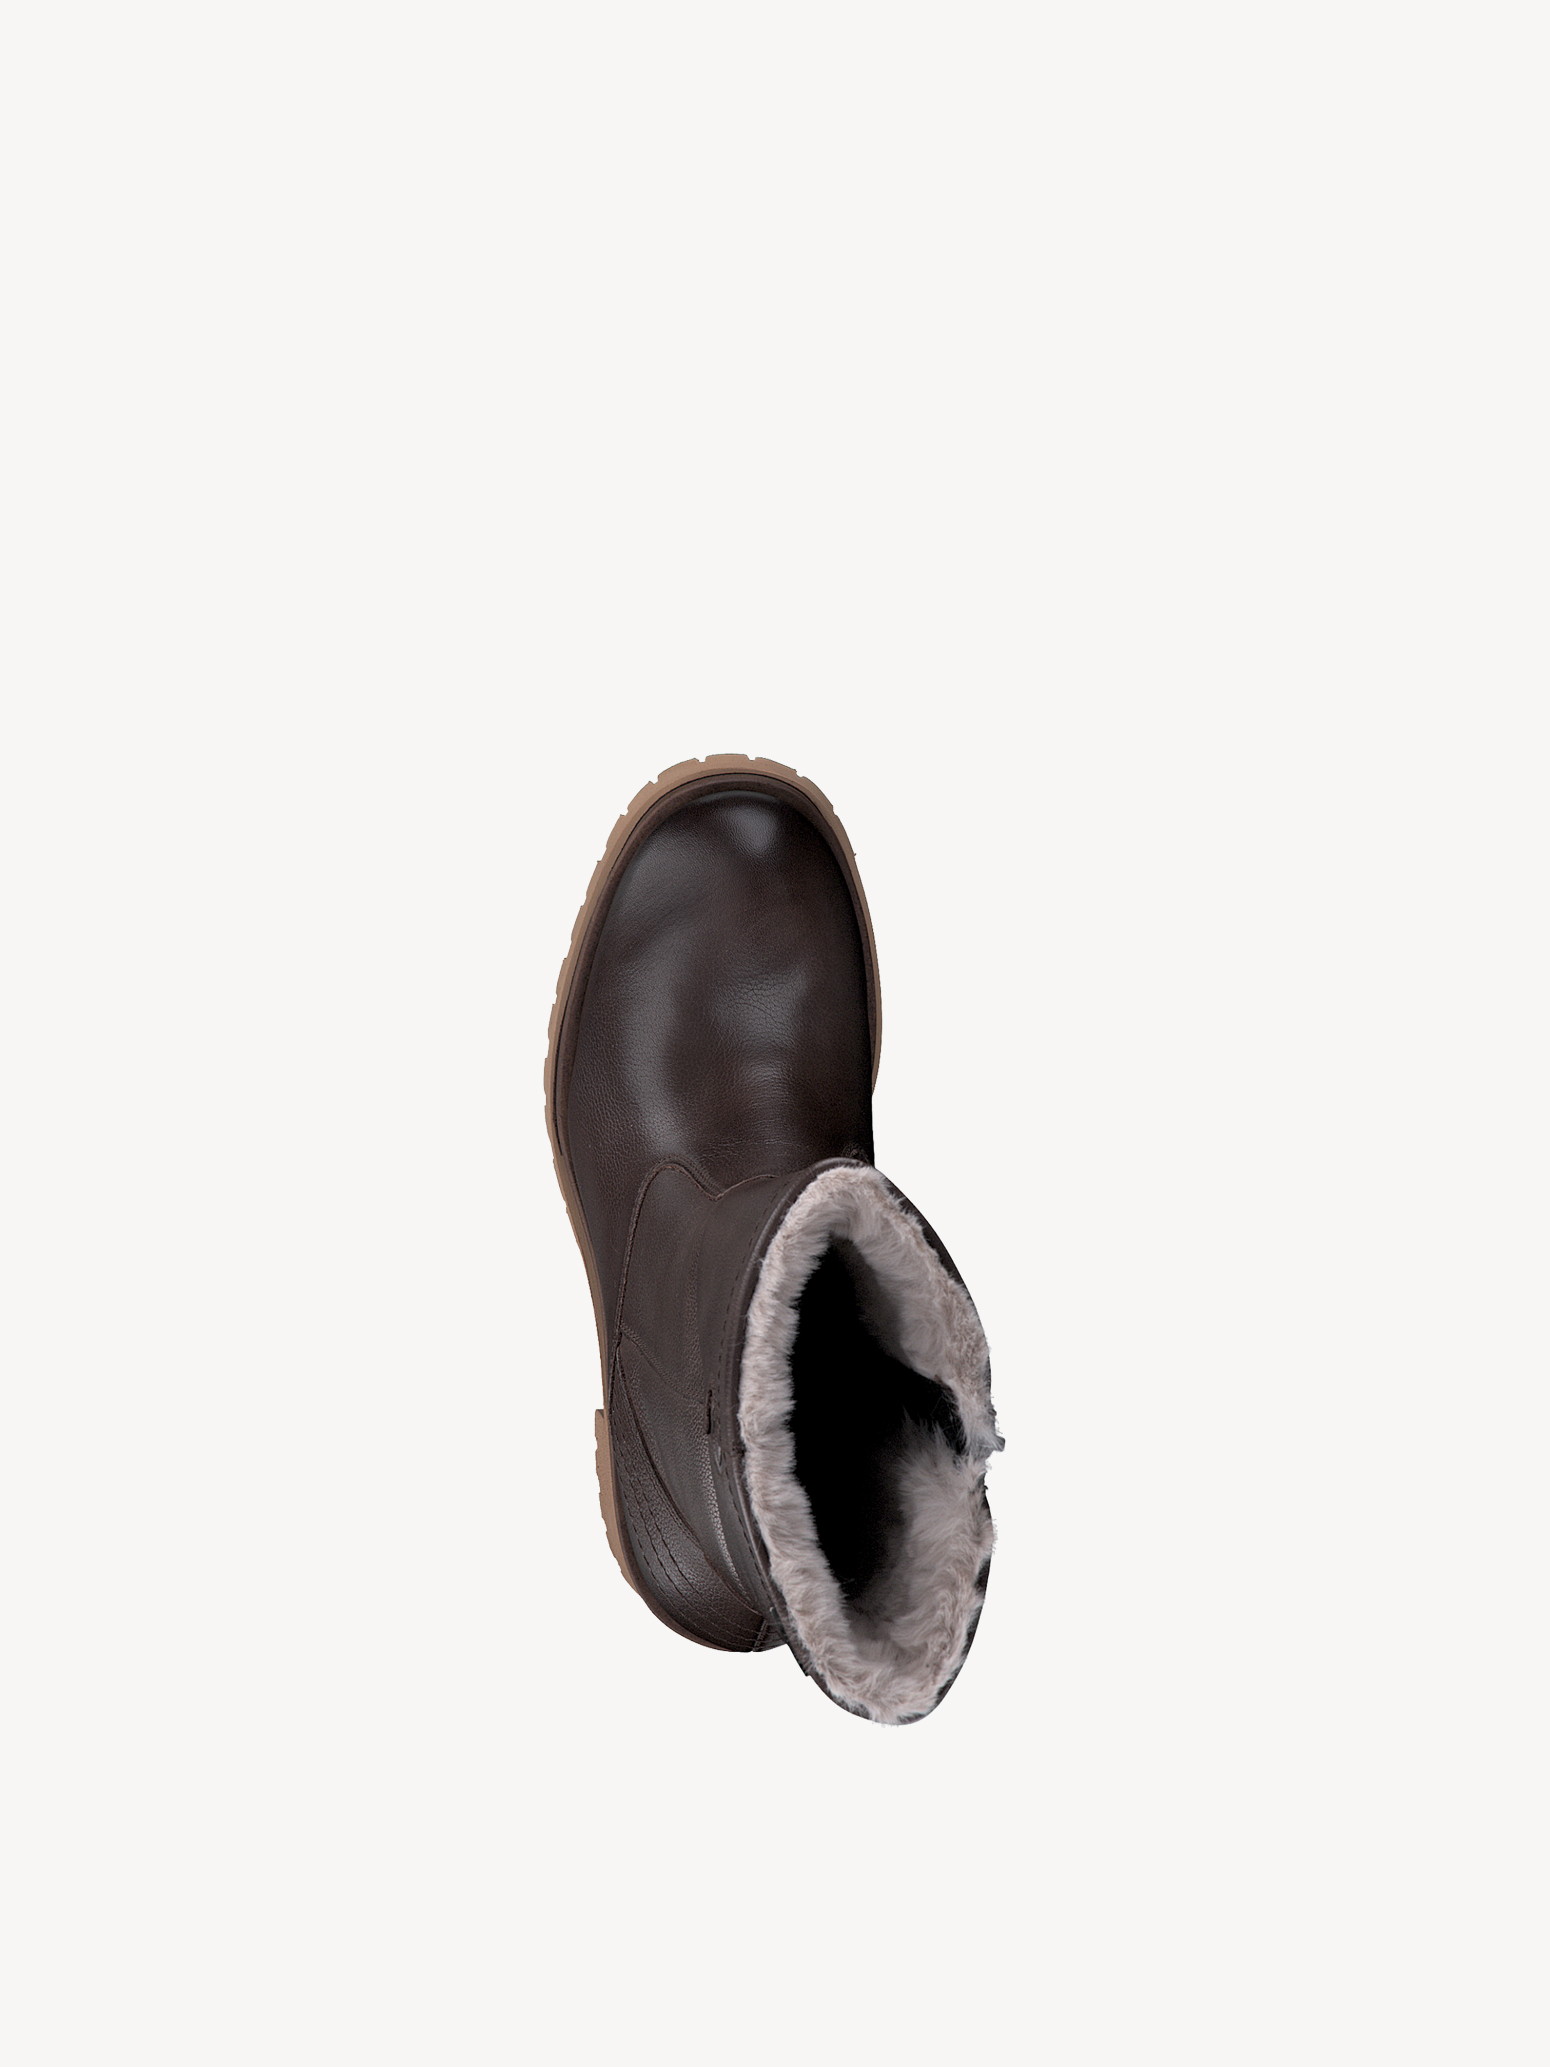 Leather Bootie - brown warm lining, BROWN, hi-res